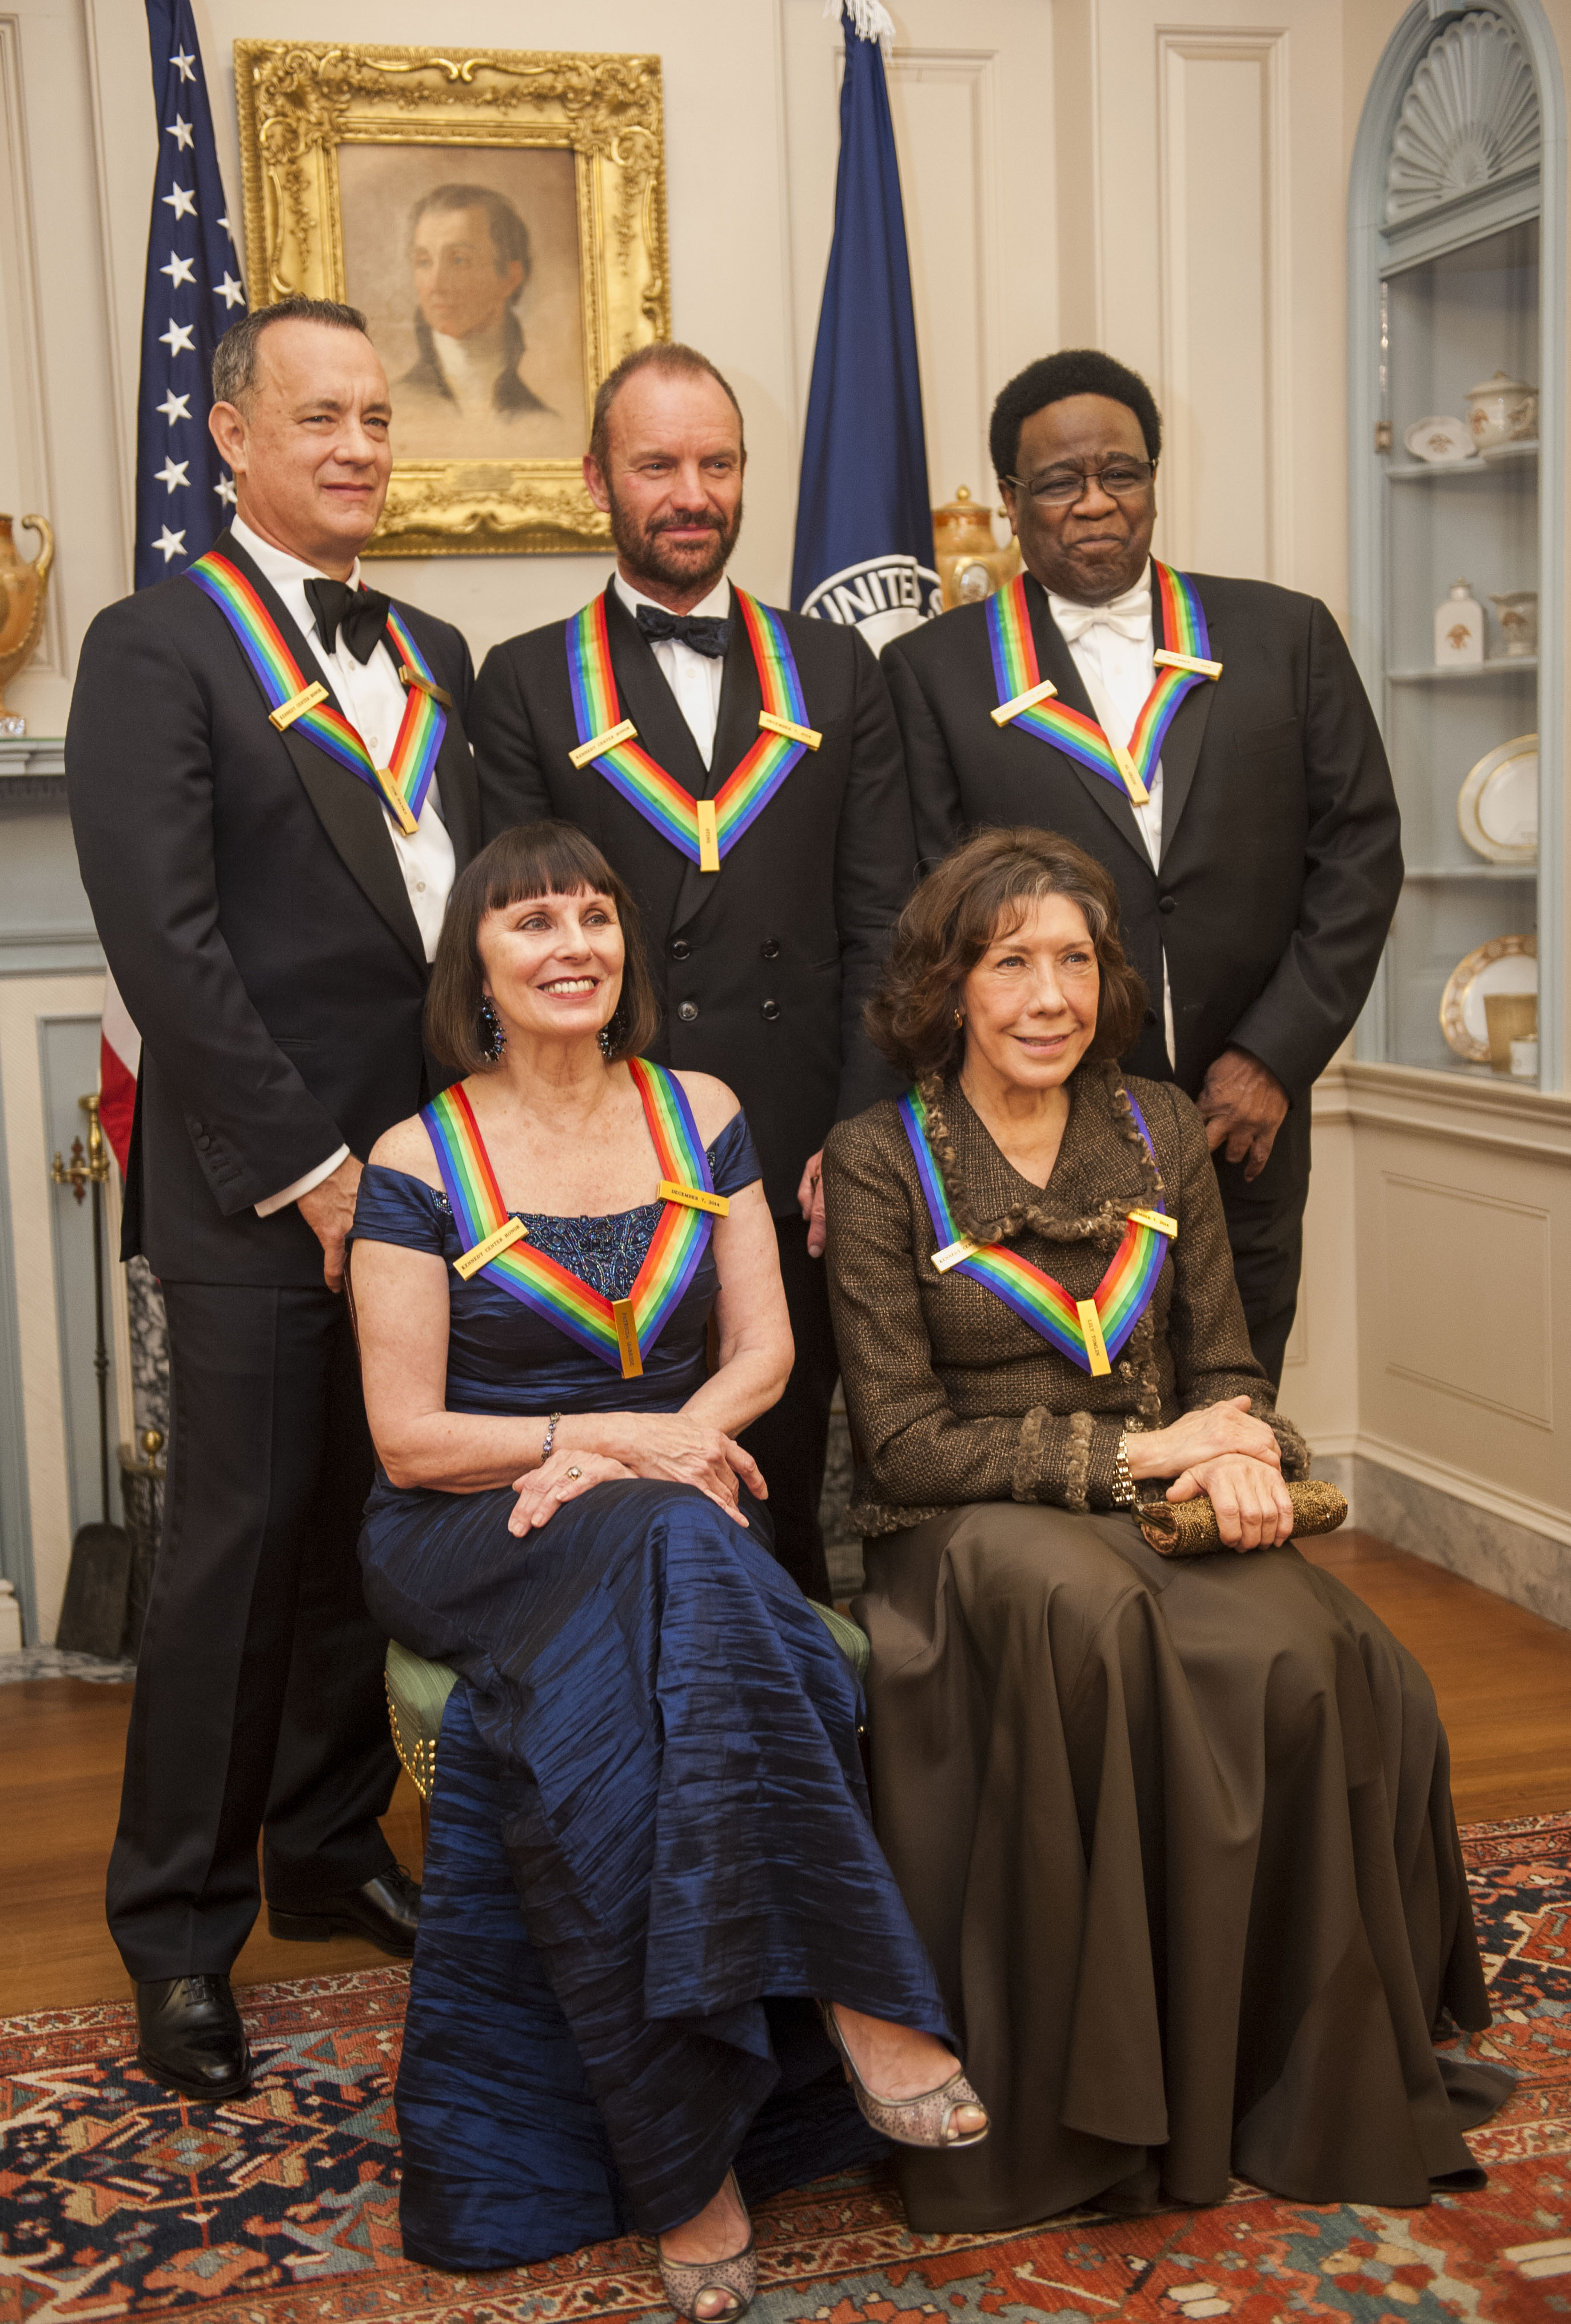 Kennedy Center honorees applauded in Washington The Blade